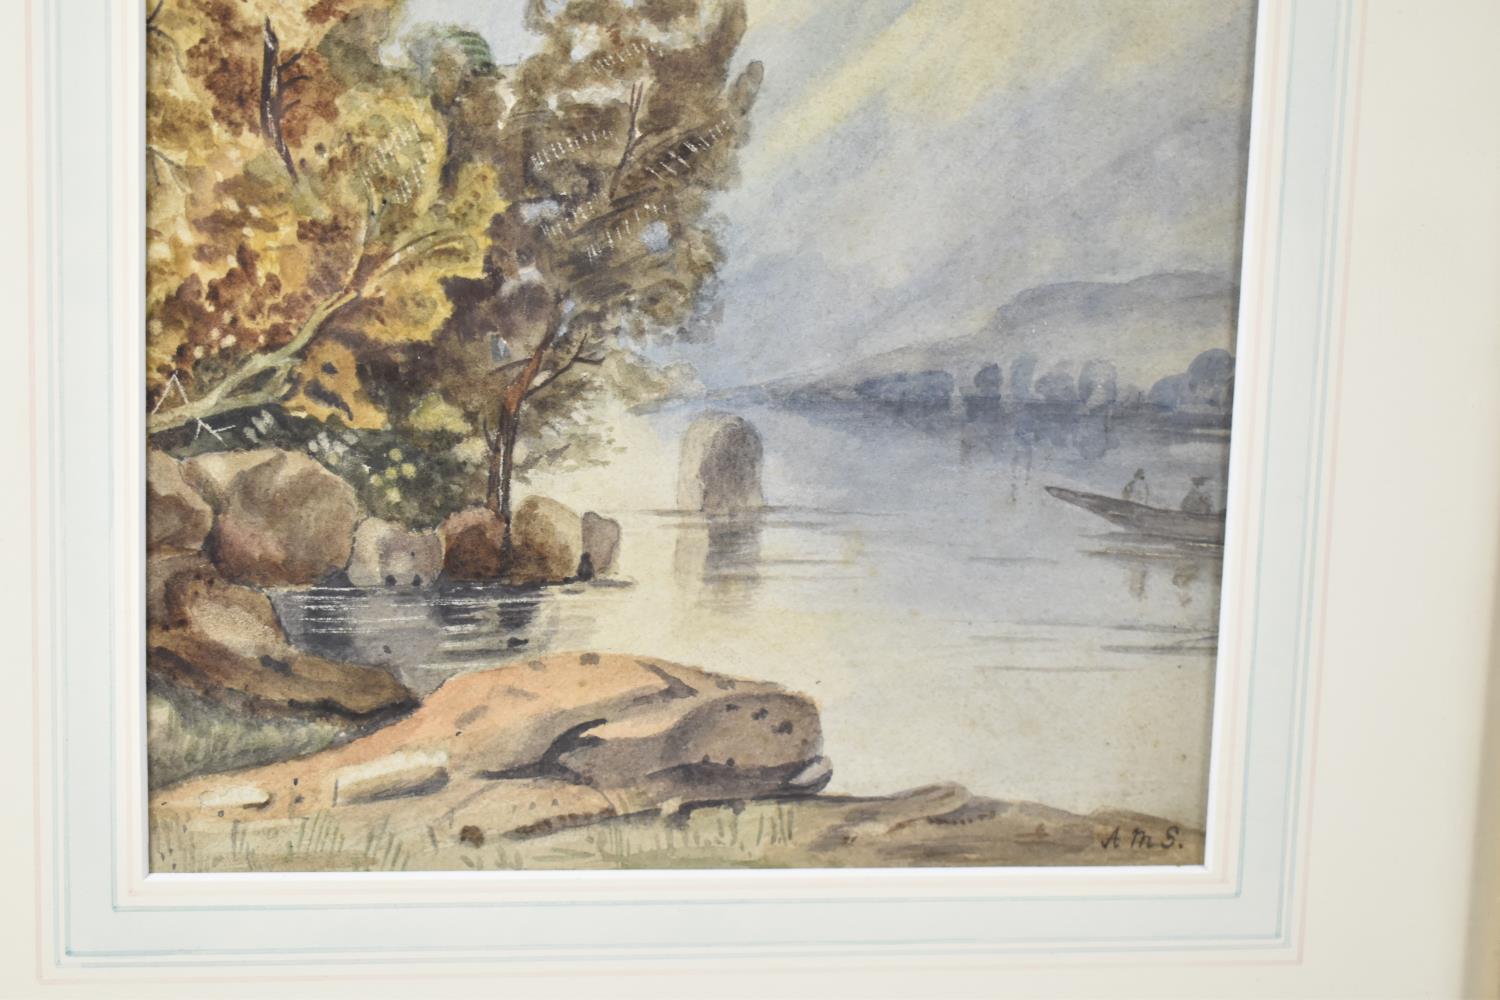 A Framed Watercolour Depicting 19th Century Lake Scene, 19x27cm - Image 2 of 2